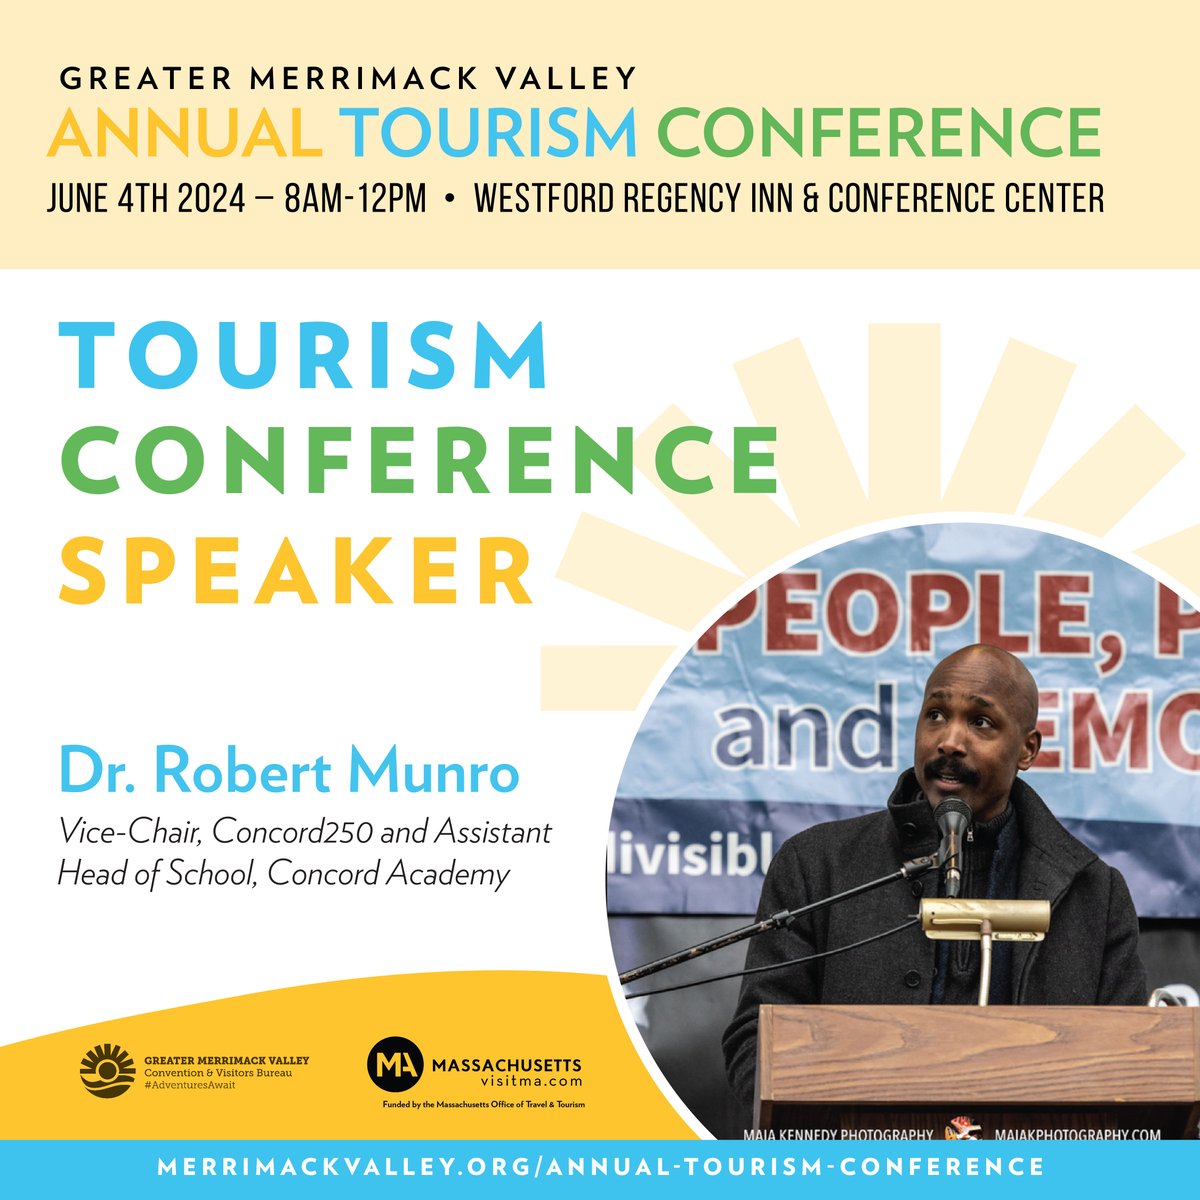 🌟 Spotlight on Dr. Robert Munro! 🌟 We are delighted to feature Dr. Robert Munro, Vice-Chair of @Concord250 and Assistant Head of School at @Concord_Academy, as a distinguished speaker at the 2024 Annual Conference. merrimackvalley.org/annual-tourism… #MerrimackValley #VisitMA